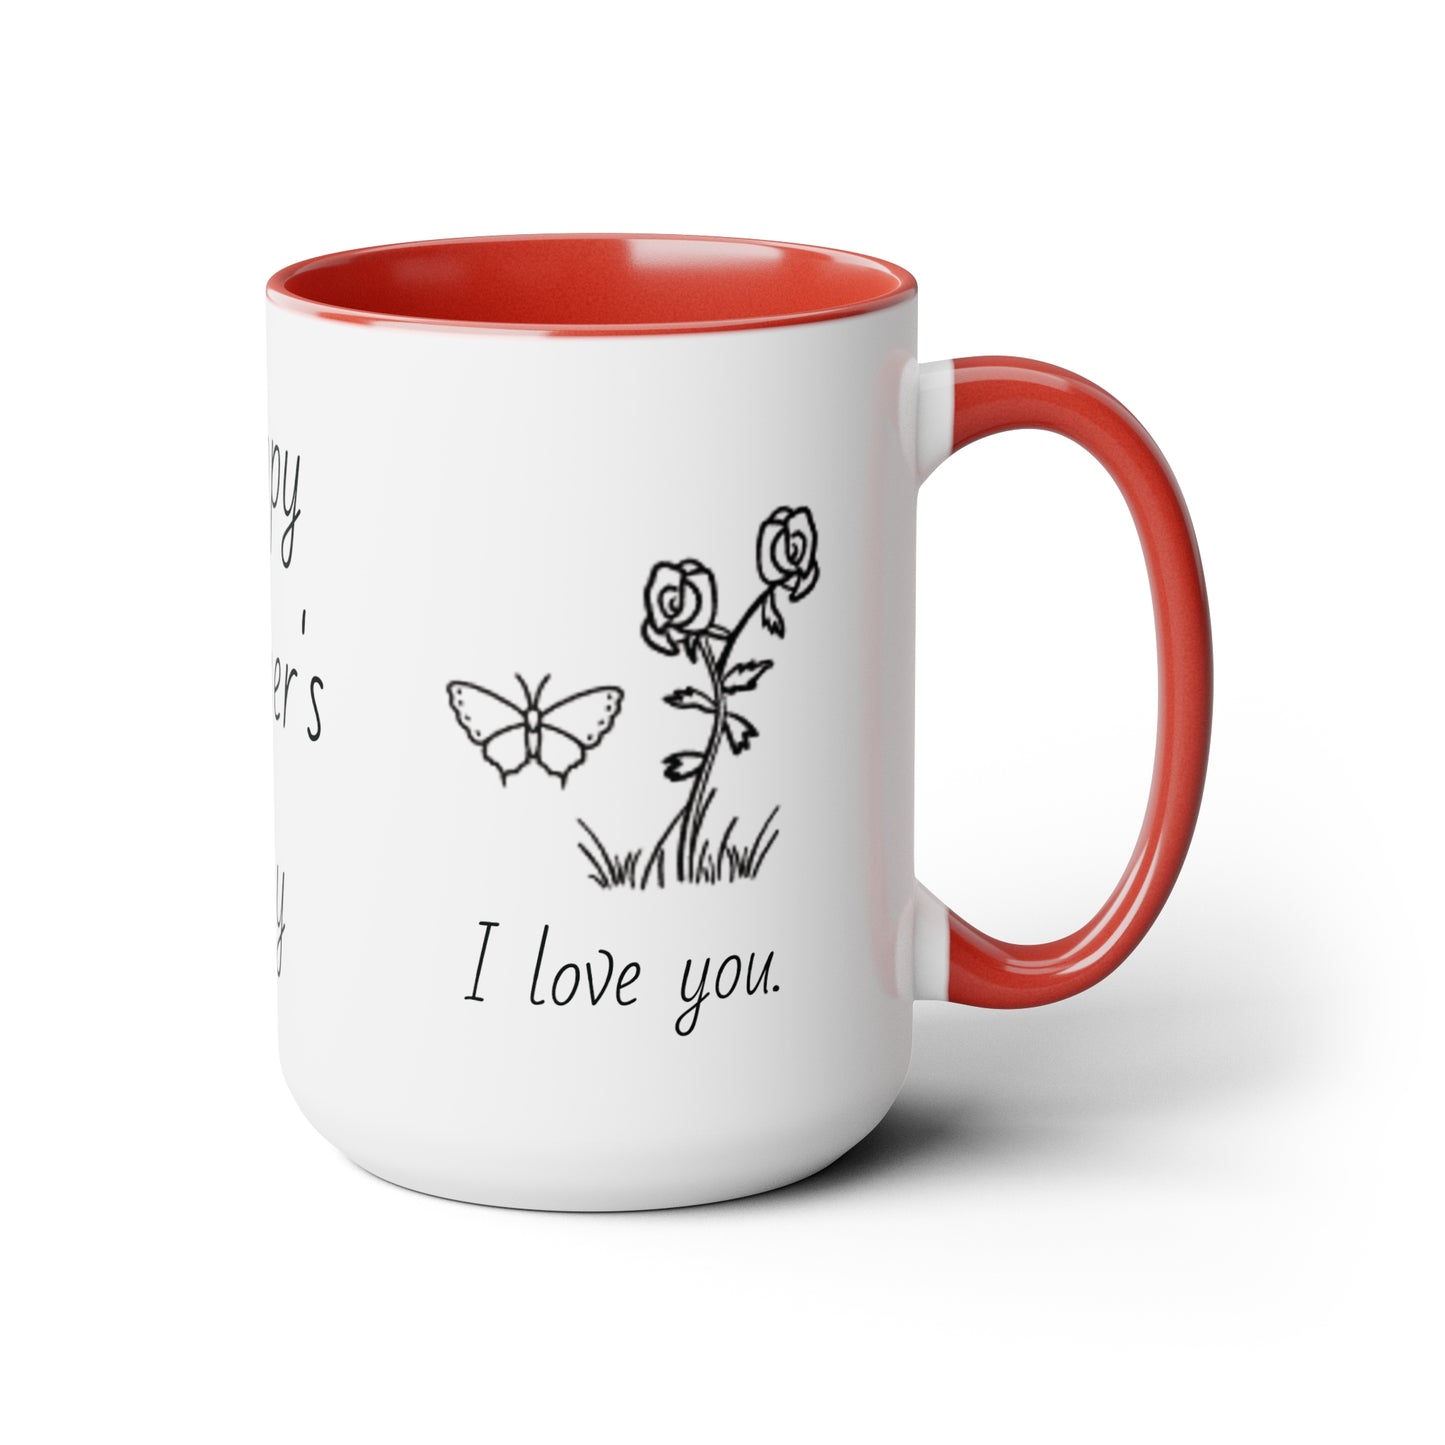 Mother's Day Two-Tone Coffee Mugs, 15oz